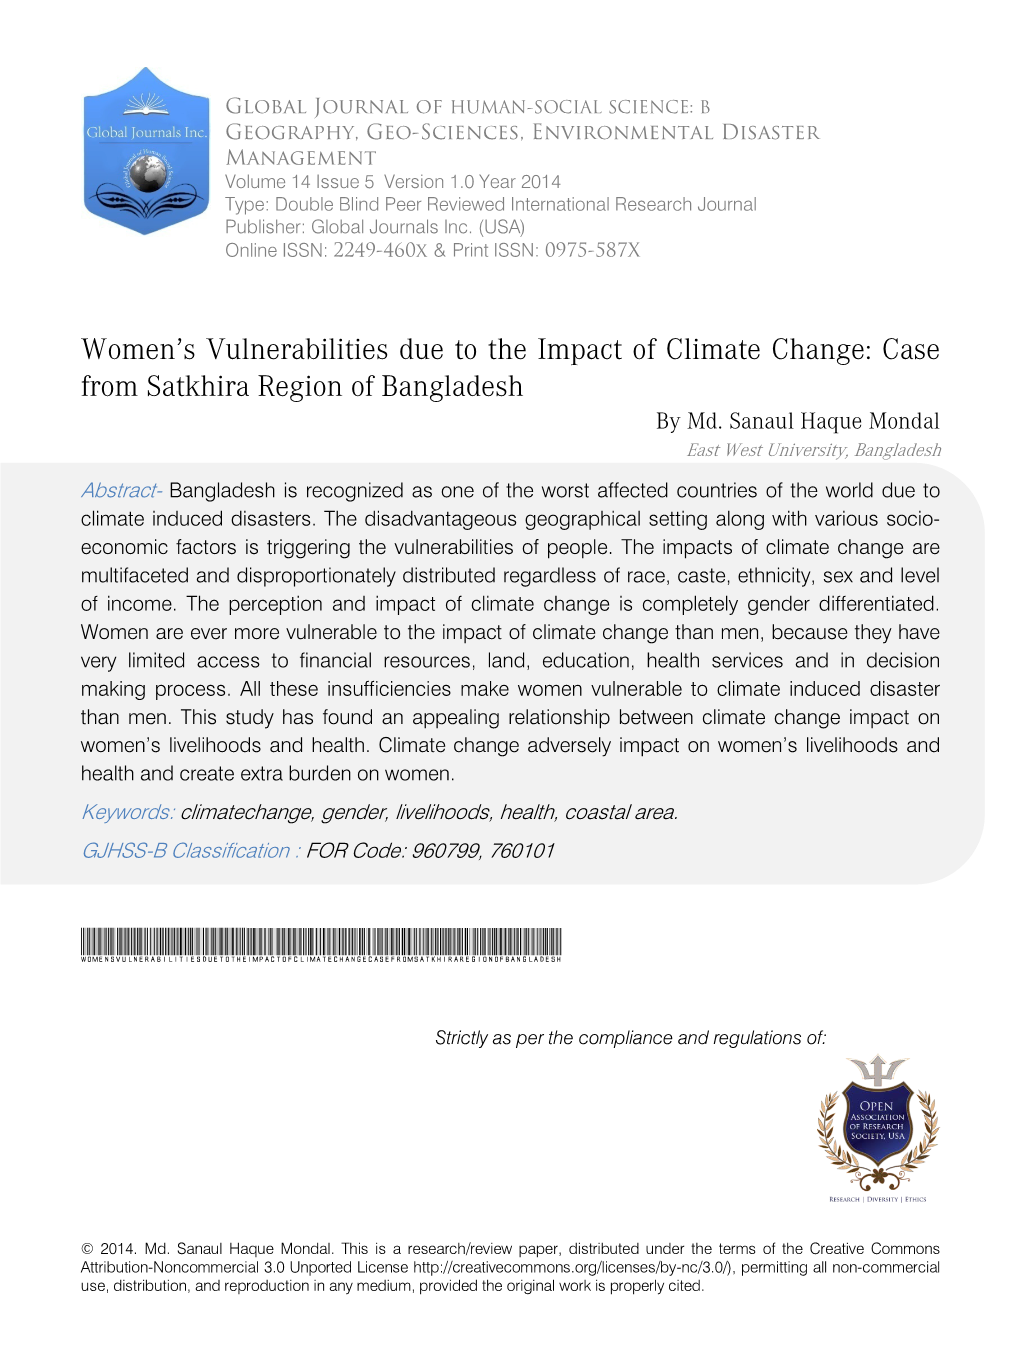 Women's Vulnerabilities Due to the Impact of Climate Change